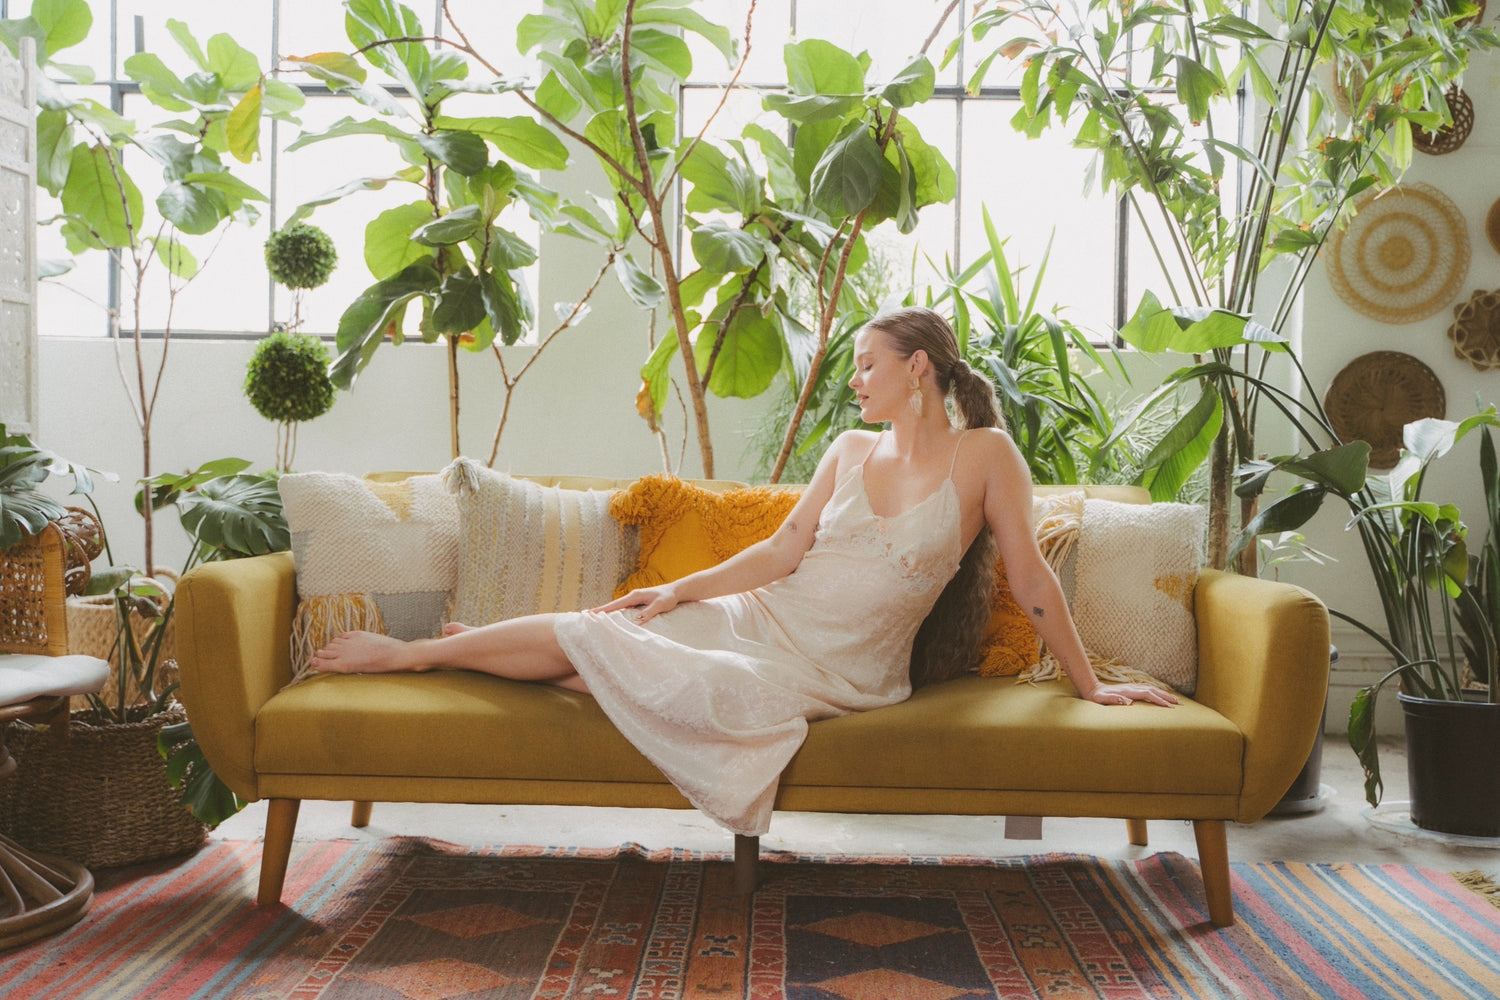 Faith Richards reclining on a couch surrounded by plants